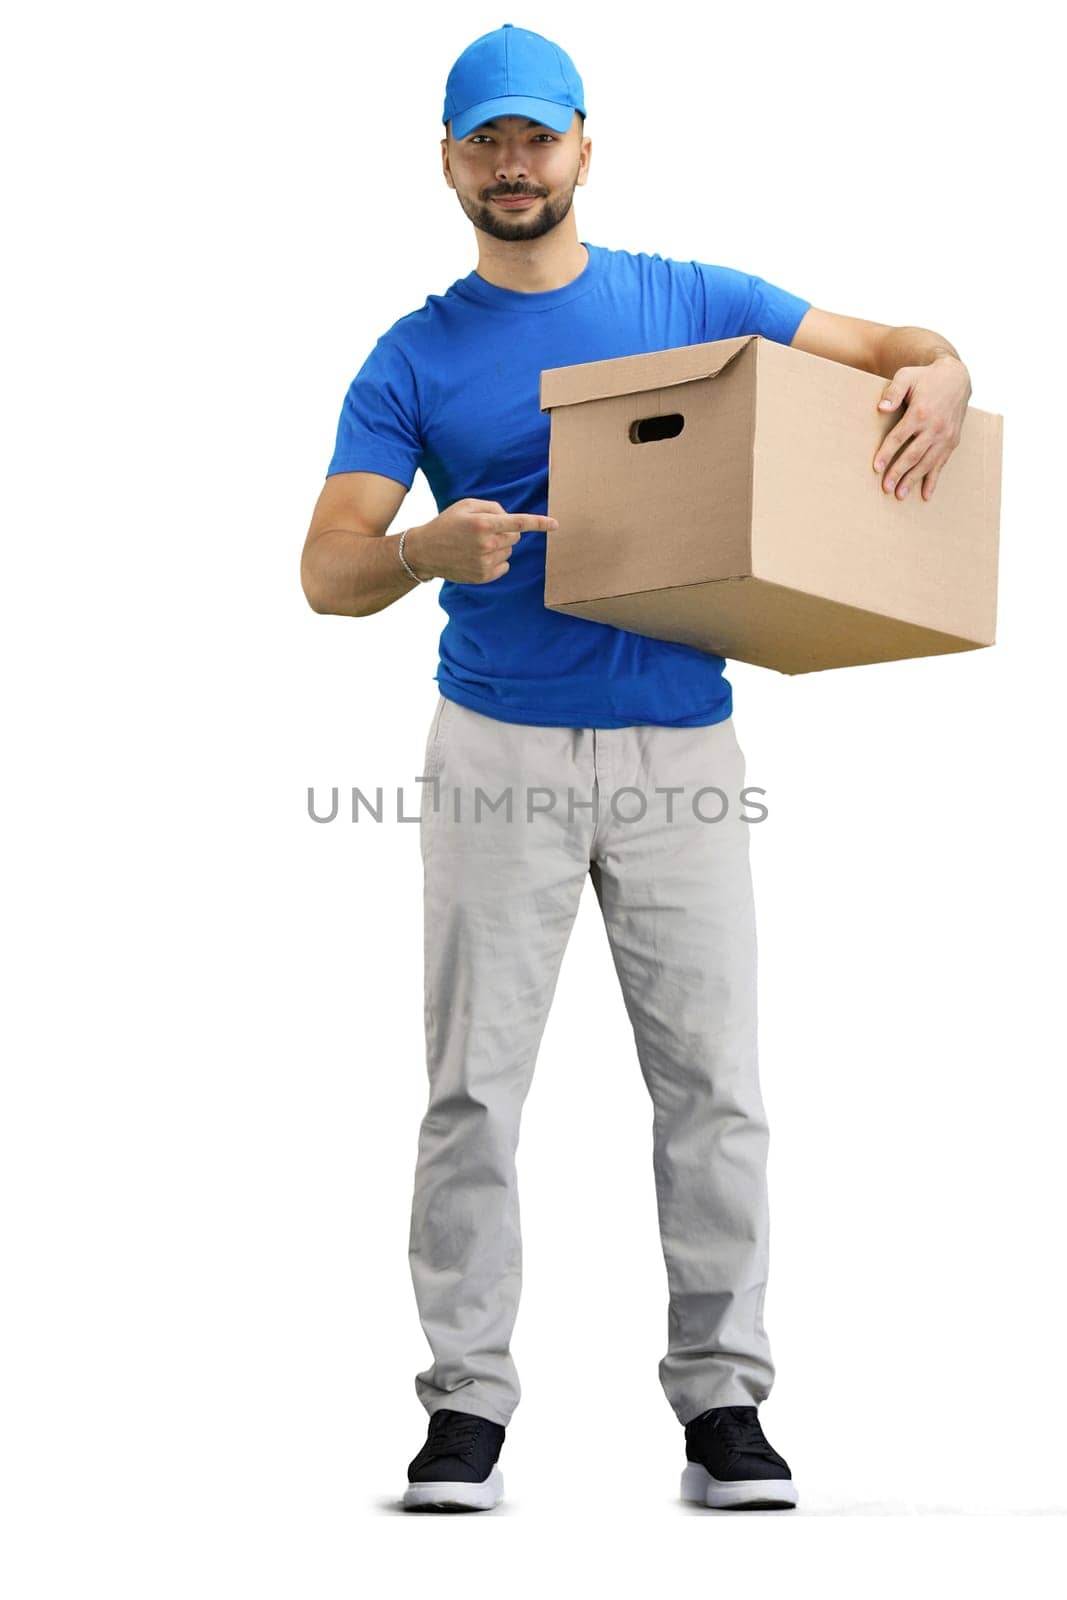 The deliveryman, in full height, on a white background, points to the box.